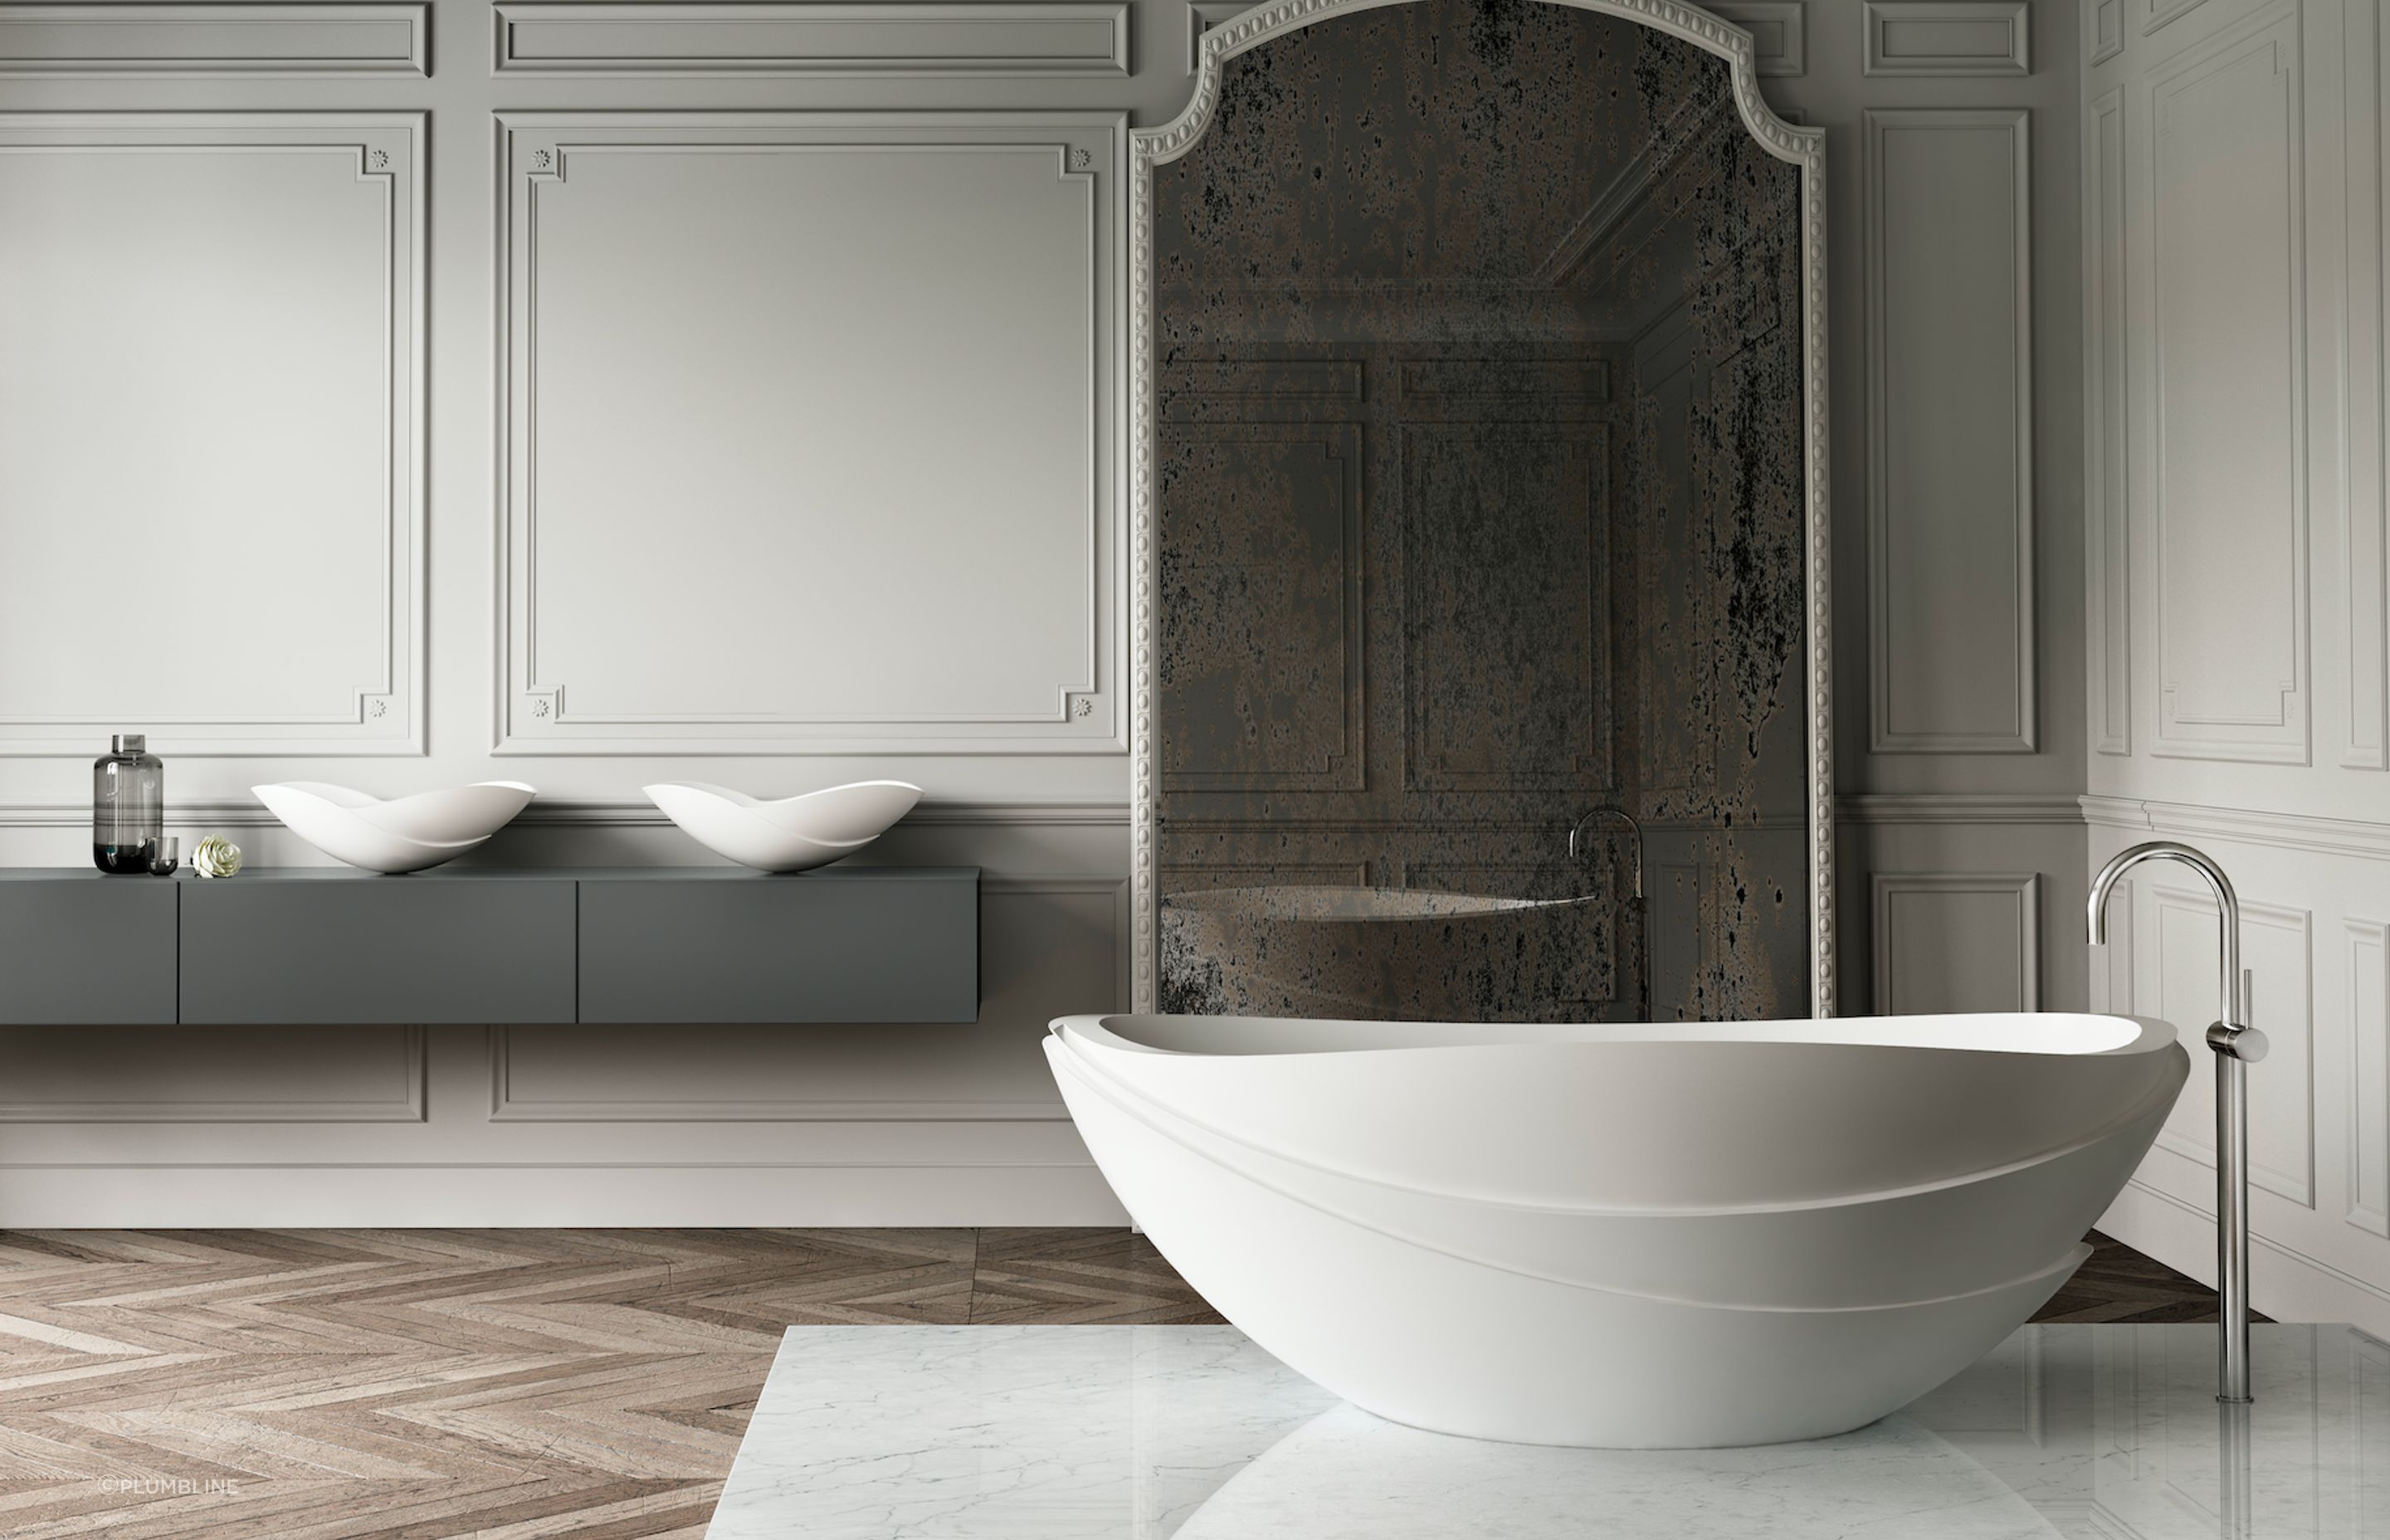 The bathroom is a great place for creativity when it comes to design, demonstrated wonderfully by this Kelly Hoppen Harmony Bath by Apaiser